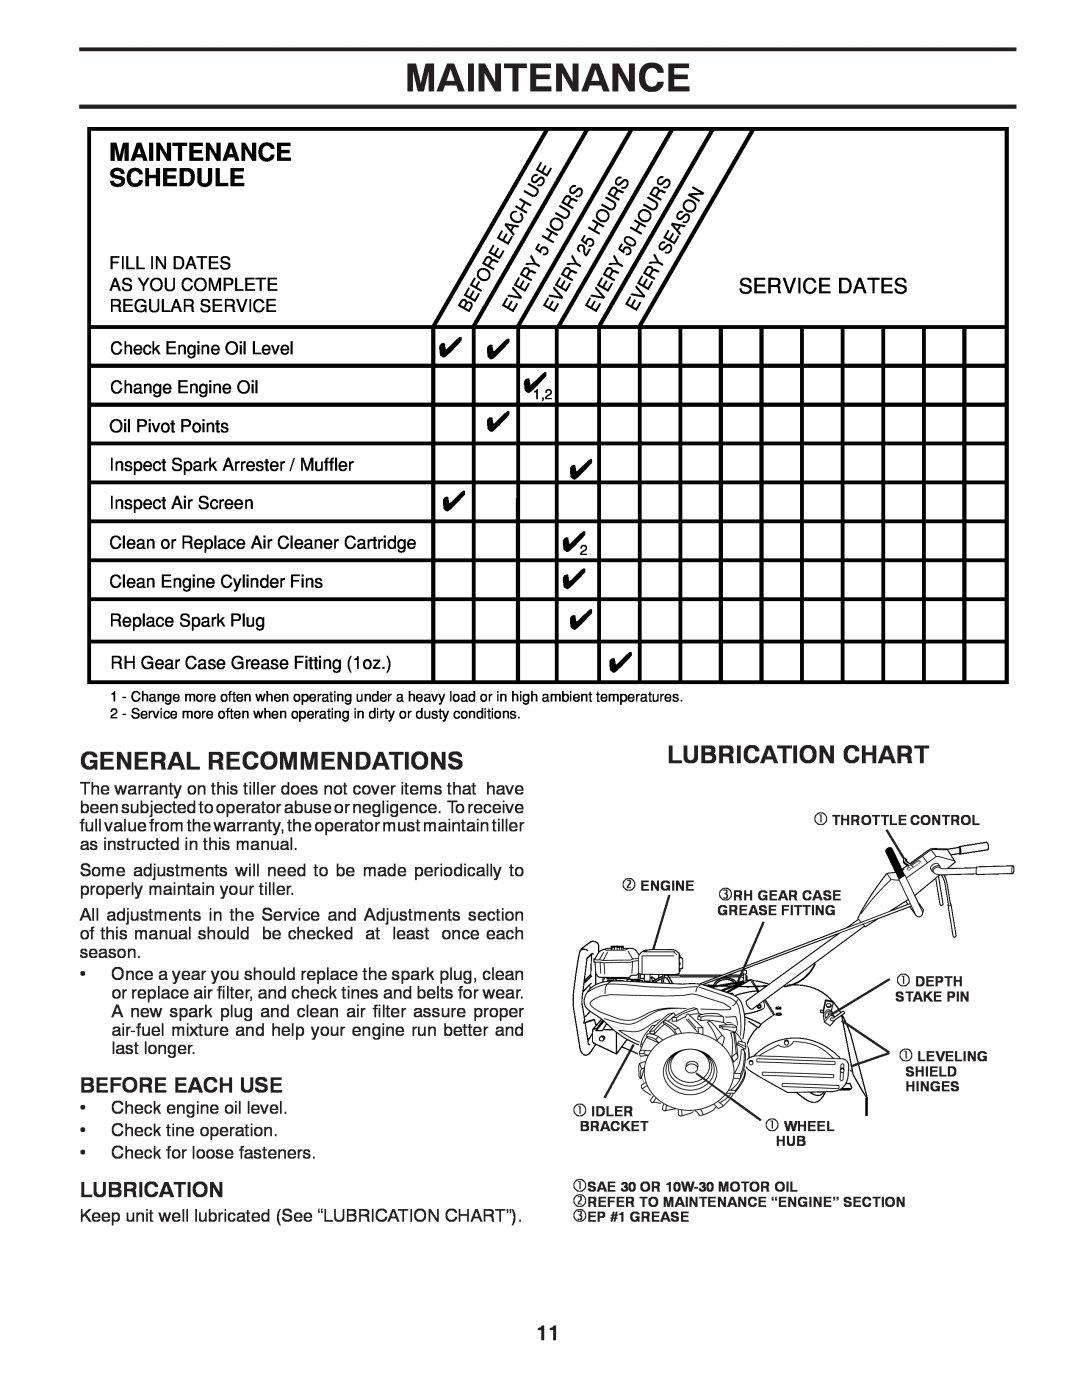 Poulan PRRT875X manual Maintenance Schedule, General Recommendations, Lubrication Chart, Service Dates, Before Each Use 